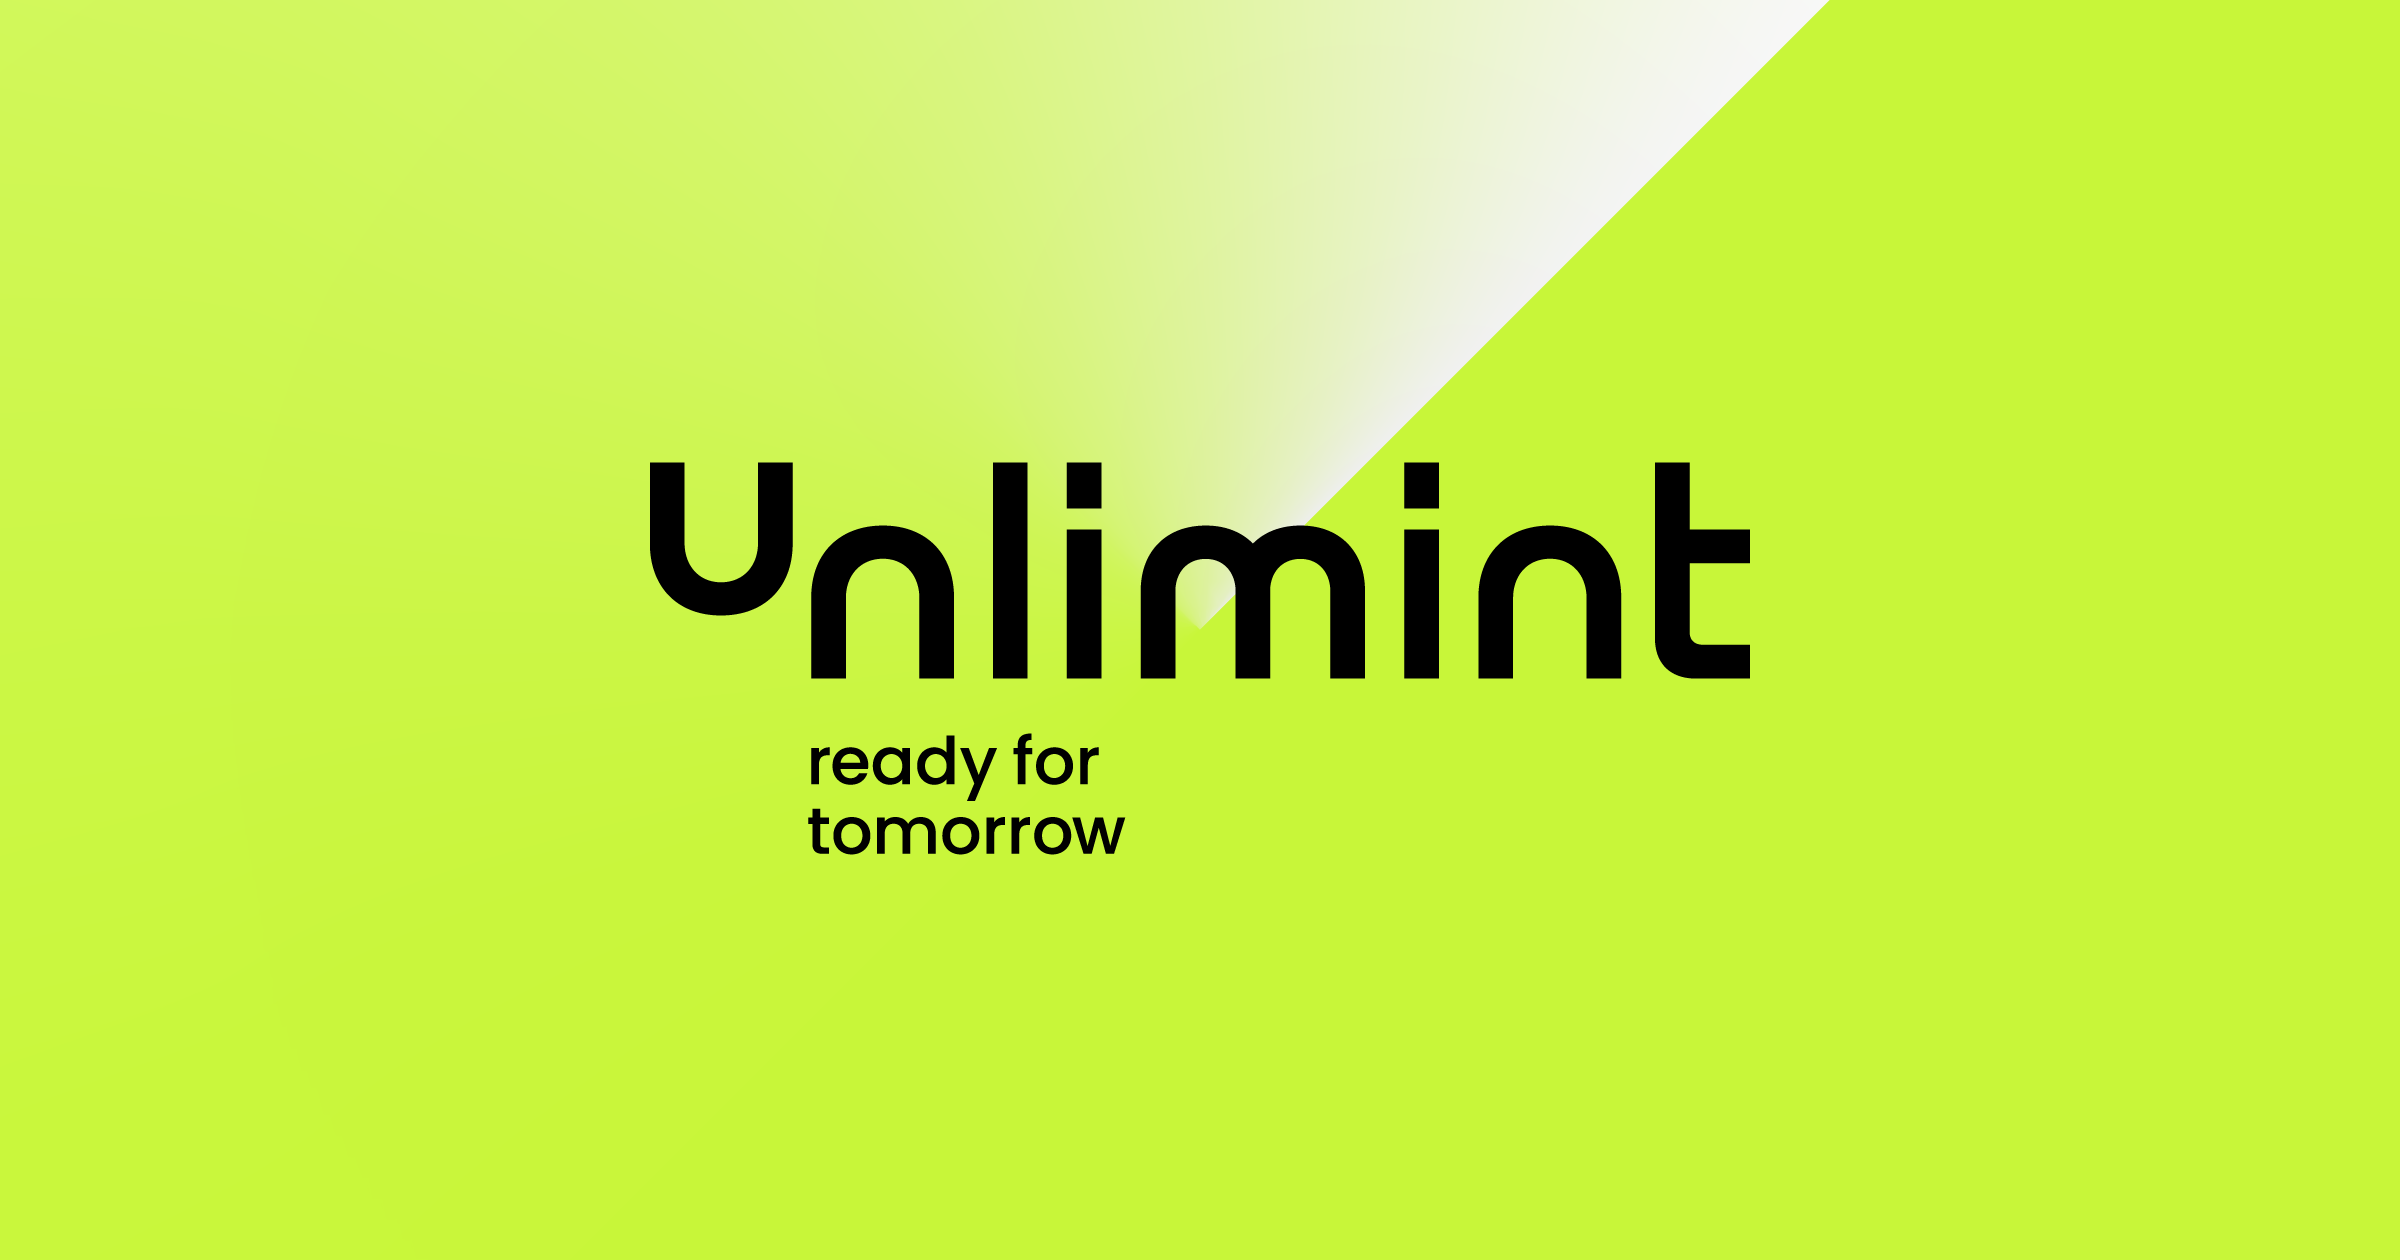 Unlimint Adds Pix to Its Acquiring Offering Globally